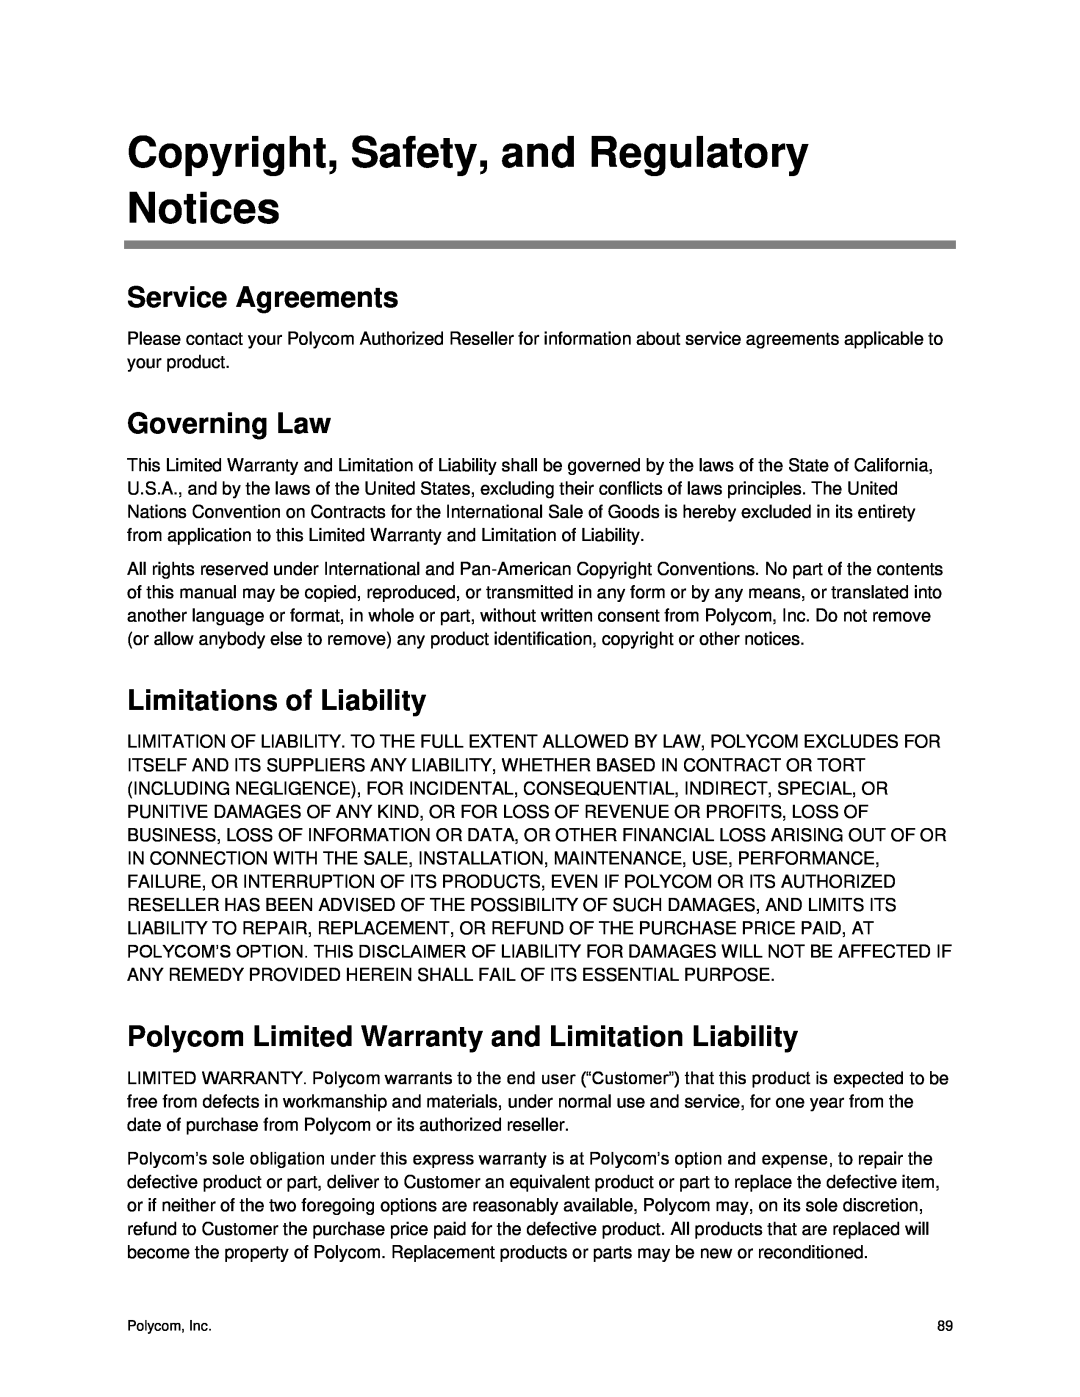 Polycom CX5500 Copyright, Safety, and Regulatory Notices, Service Agreements, Governing Law, Limitations of Liability 